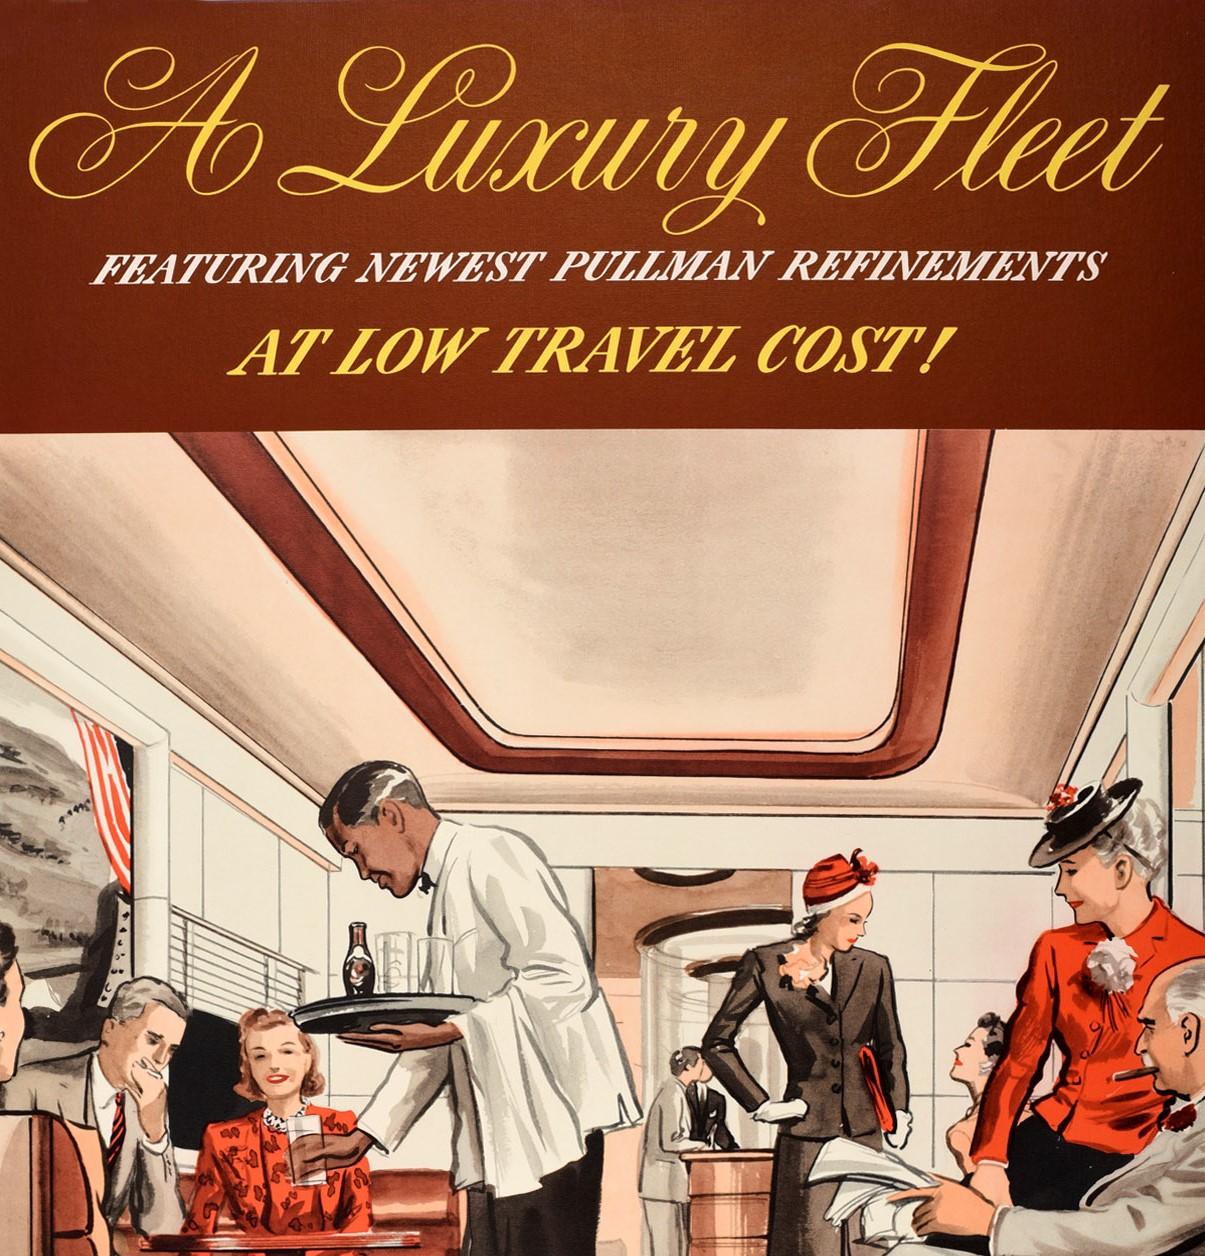 Original vintage Pennsylvania Railroad poster - A luxury fleet featuring newest Pullman refinements at low travel cost! - showing smartly dressed passengers enjoying the inside of a Pullman train carriage with a waiter serving drinks to people